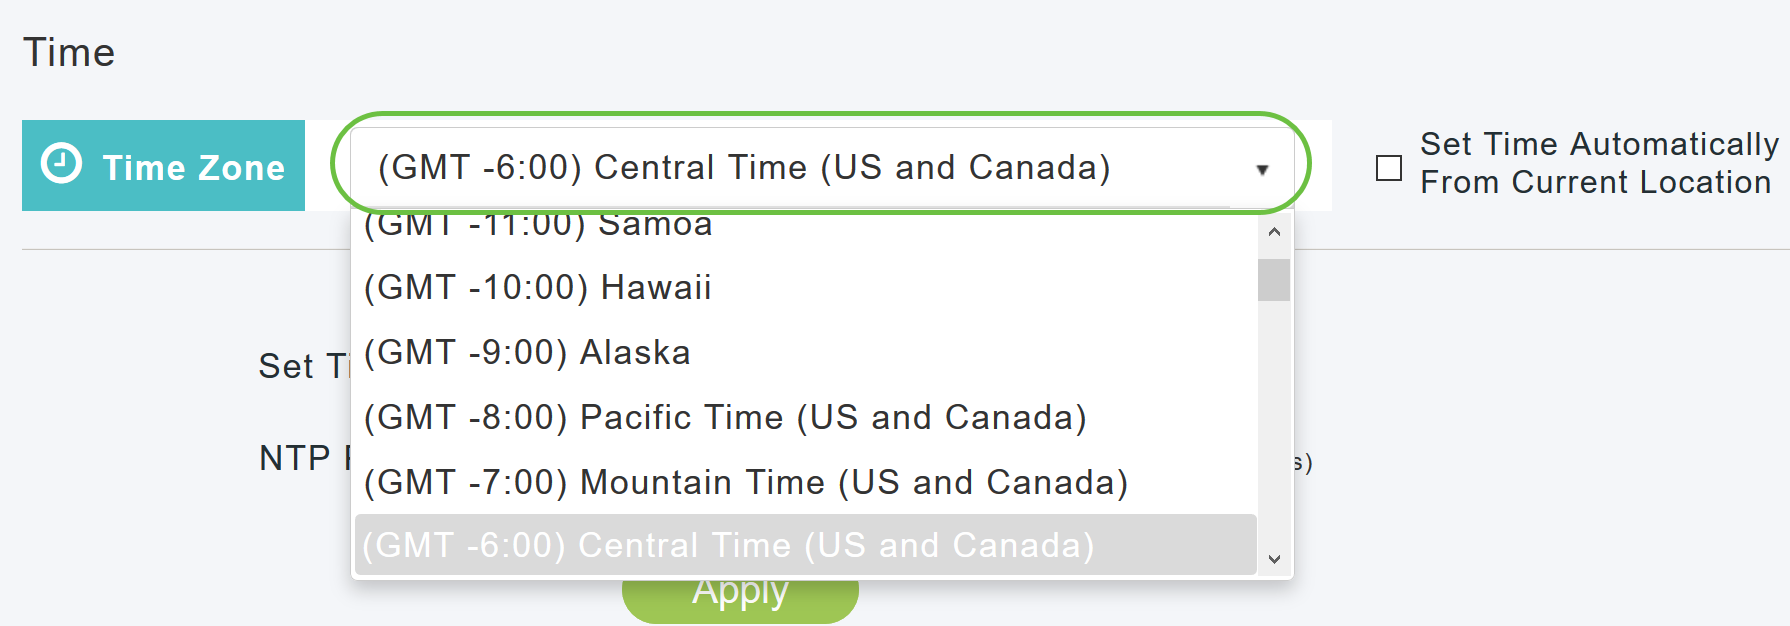 From the Time Zone drop-down list, choose your local time zone.